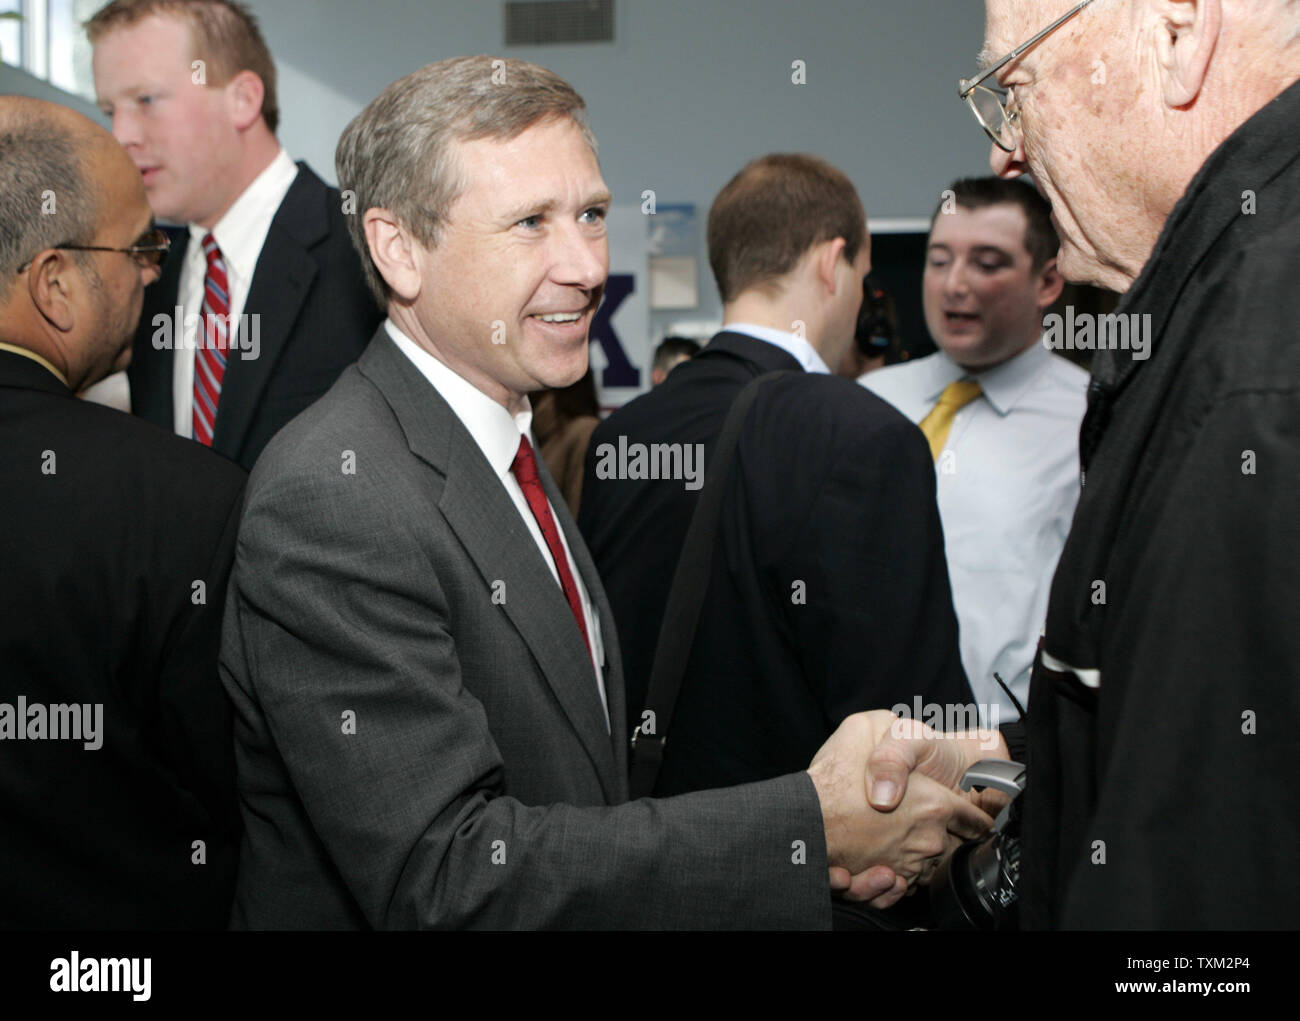 U.S. Senate candidate Mark Kirk (R-IL) greets supporters during a campaign stop with other members of the Illinois Republican ticket at Willard Airport in Champaign, IL., November 1, 2010.  UPI Photo/Mark Cowan Stock Photo